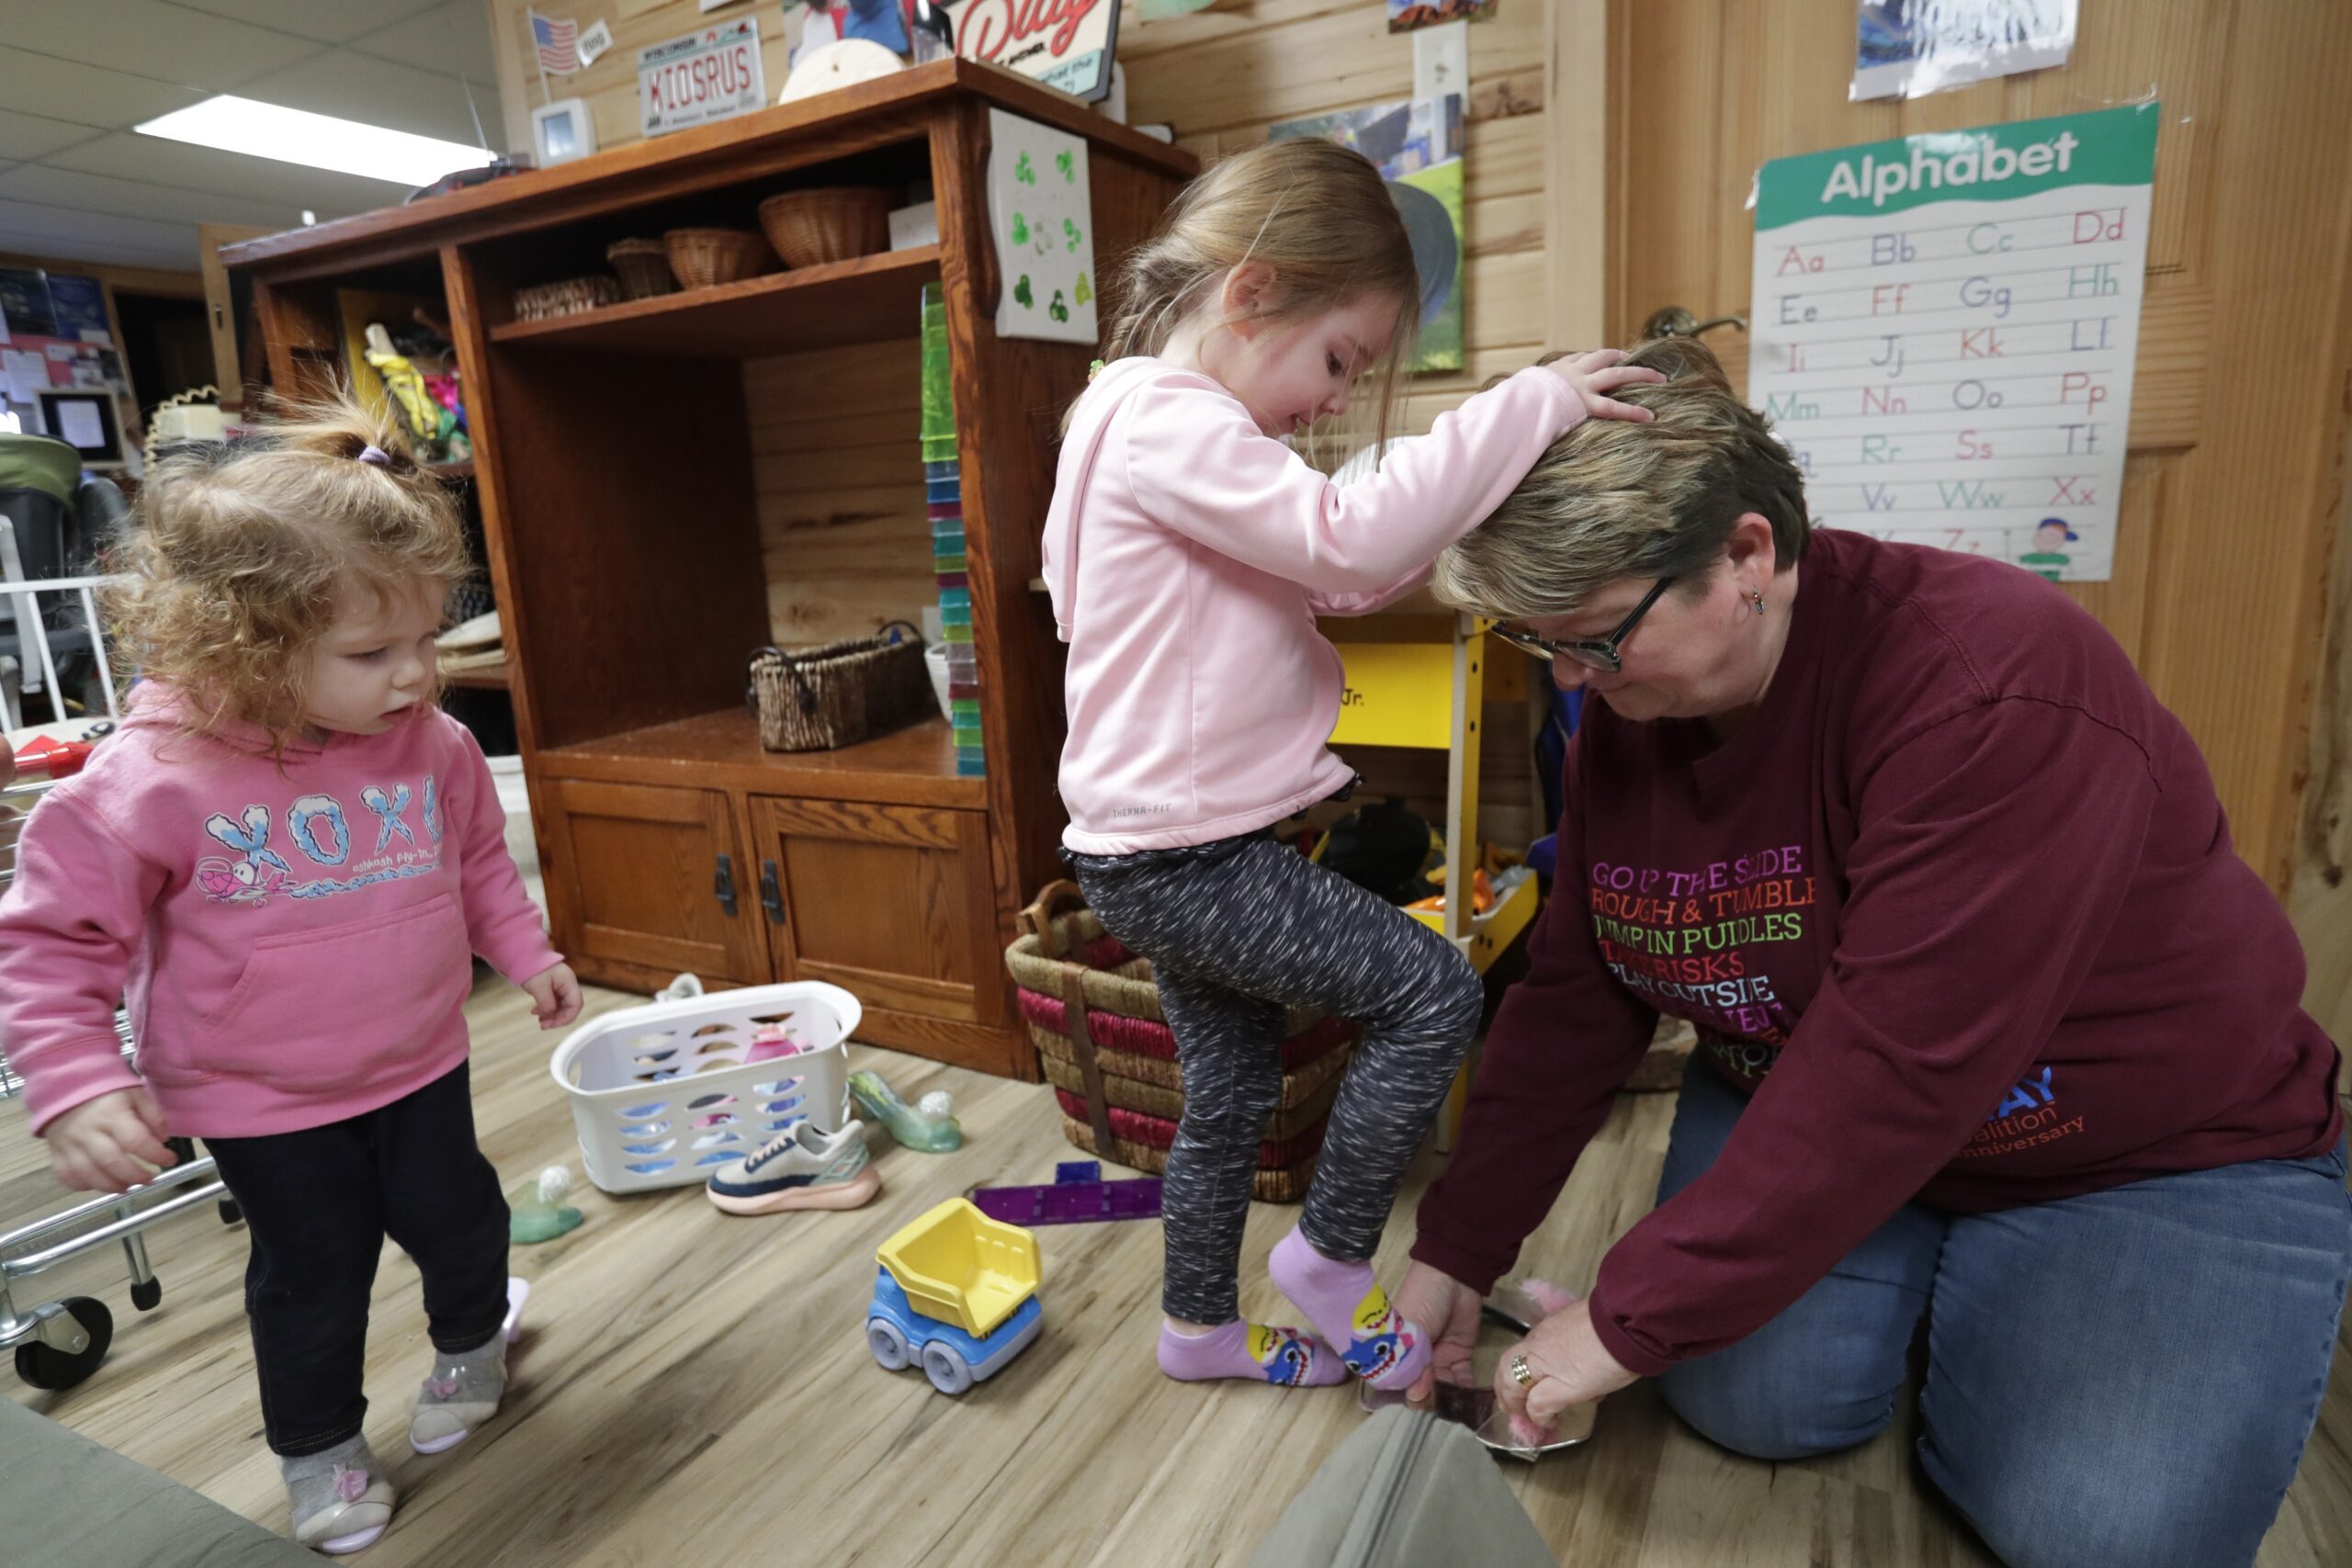 Two toddlers try on dress up shoes with the help of their teacher